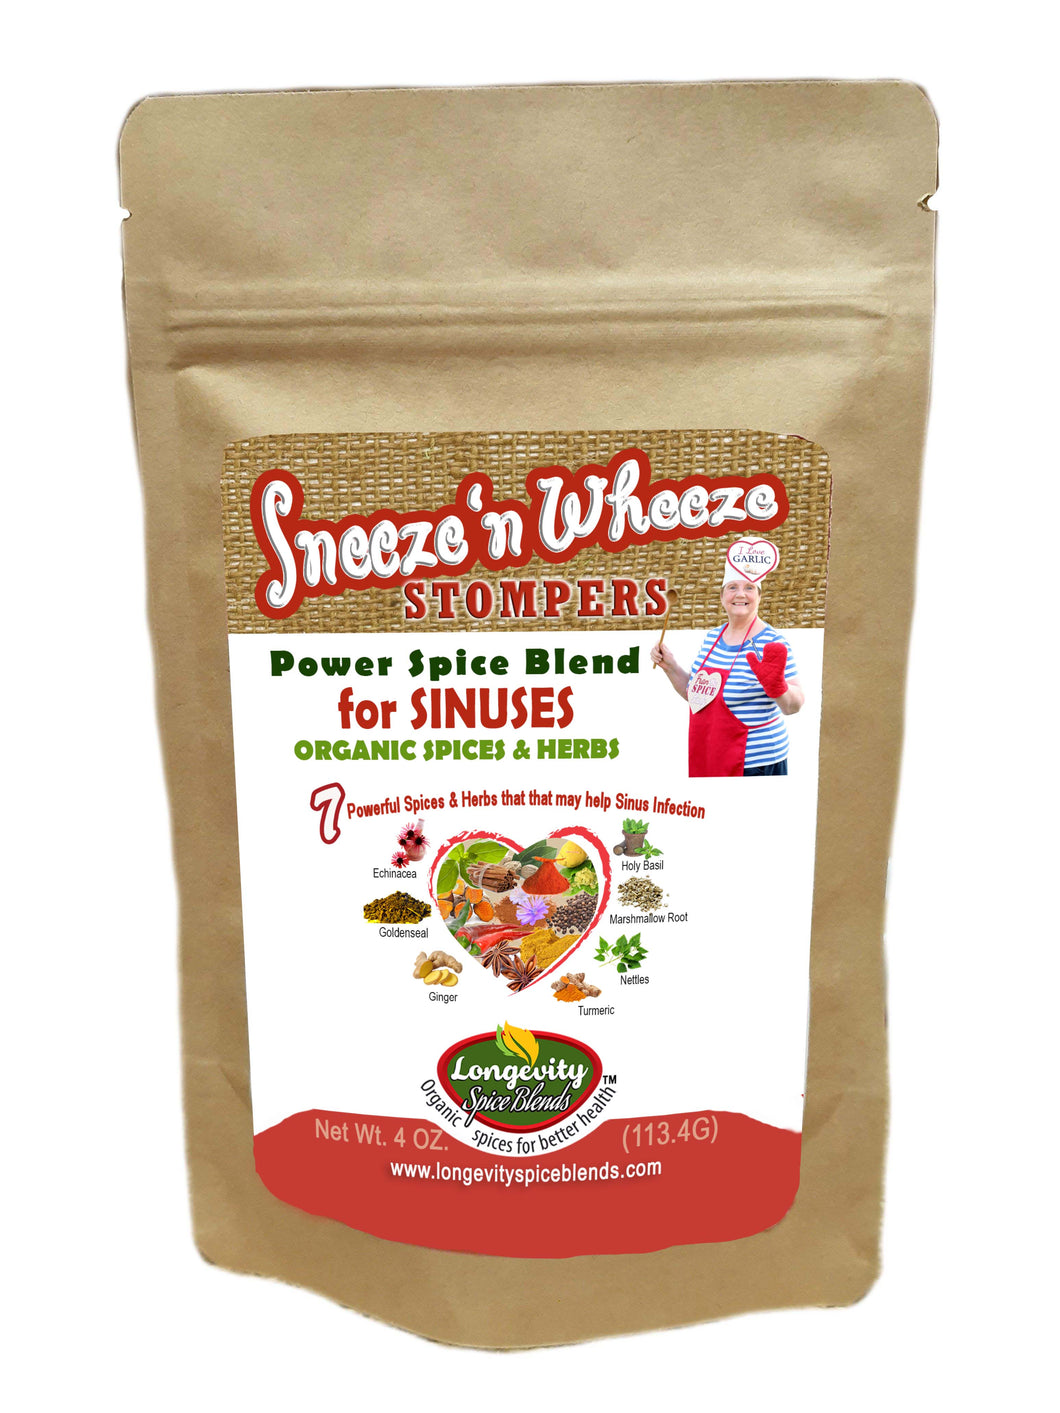 Sinus | Sneeze 'n Wheeze Stompers - Relieve Sinus Infection with Spices & Herbs